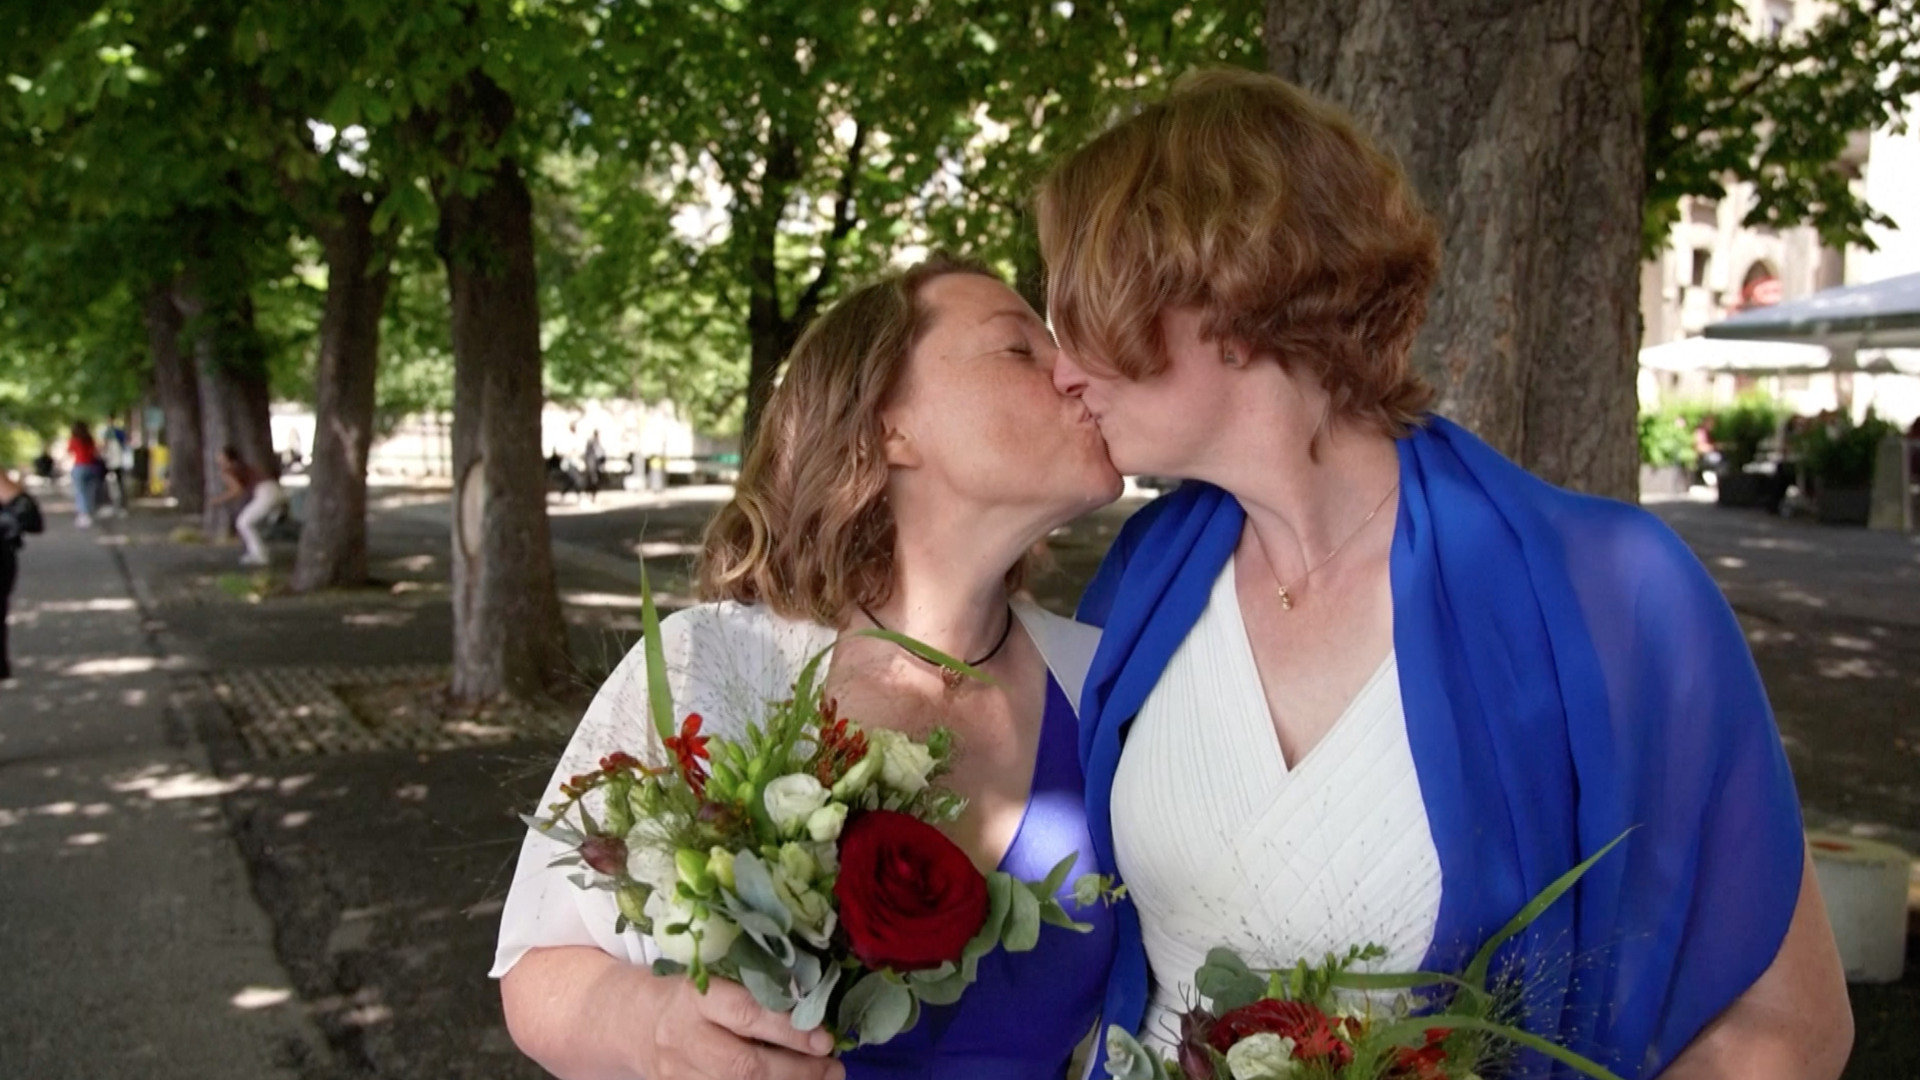 Watch The Uplift First Swiss same-sex couples tie the knot